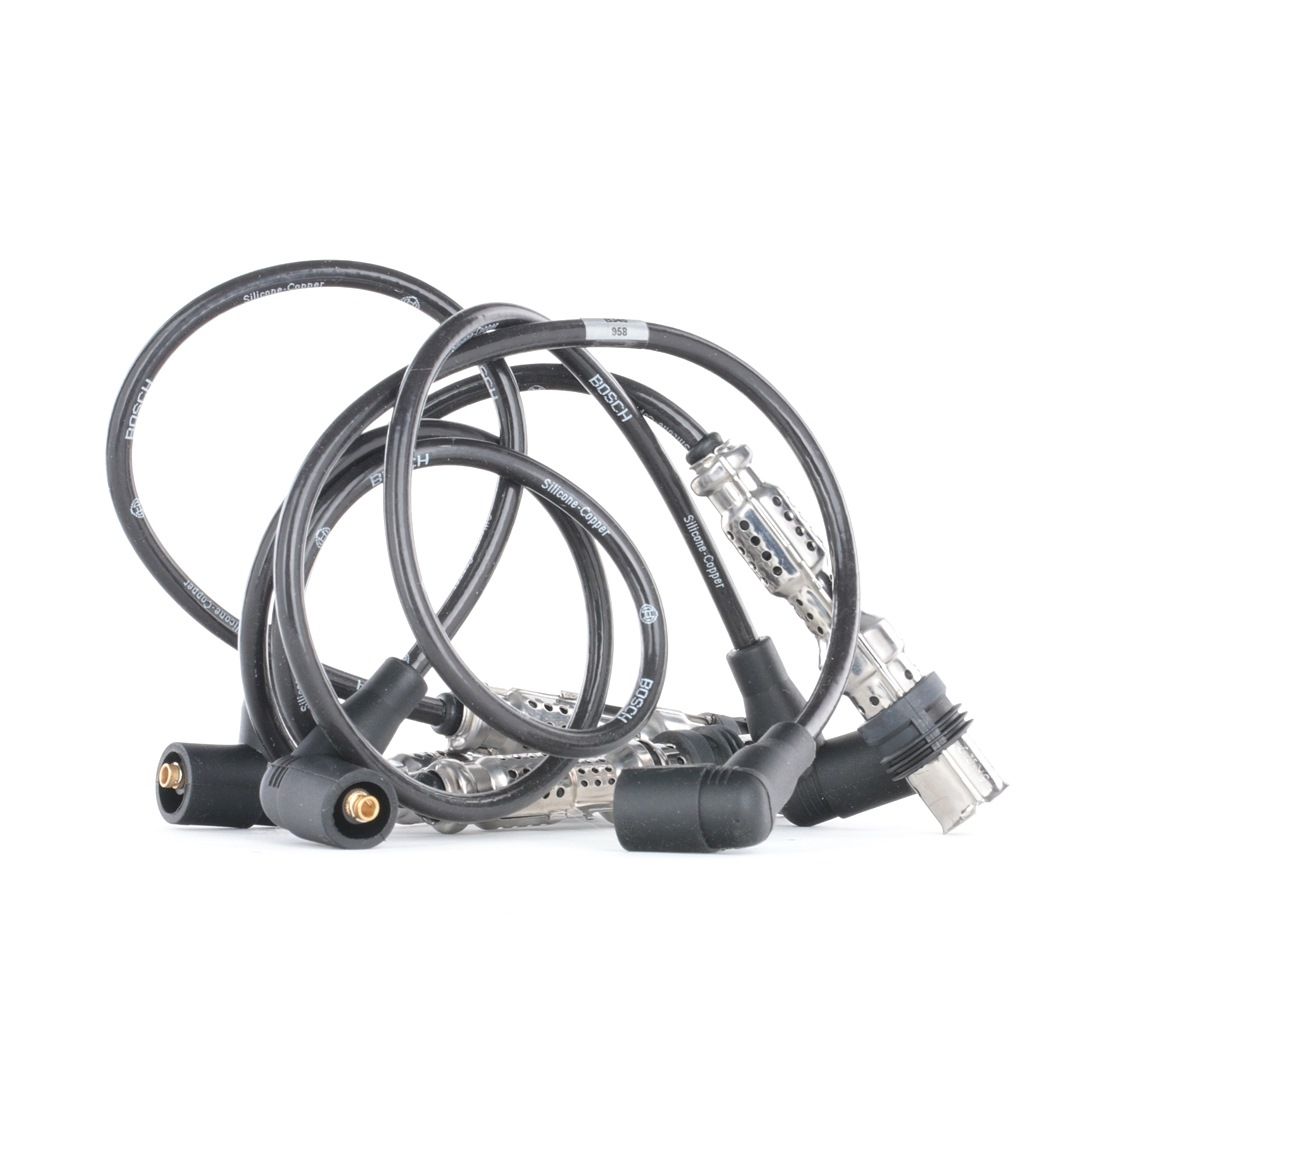 Image of BOSCH Ignition Lead Set VW 0 986 356 345 06A905409N Ignition Cable Set,Ignition Wire Set,Ignition Cable Kit,Ignition Lead Kit